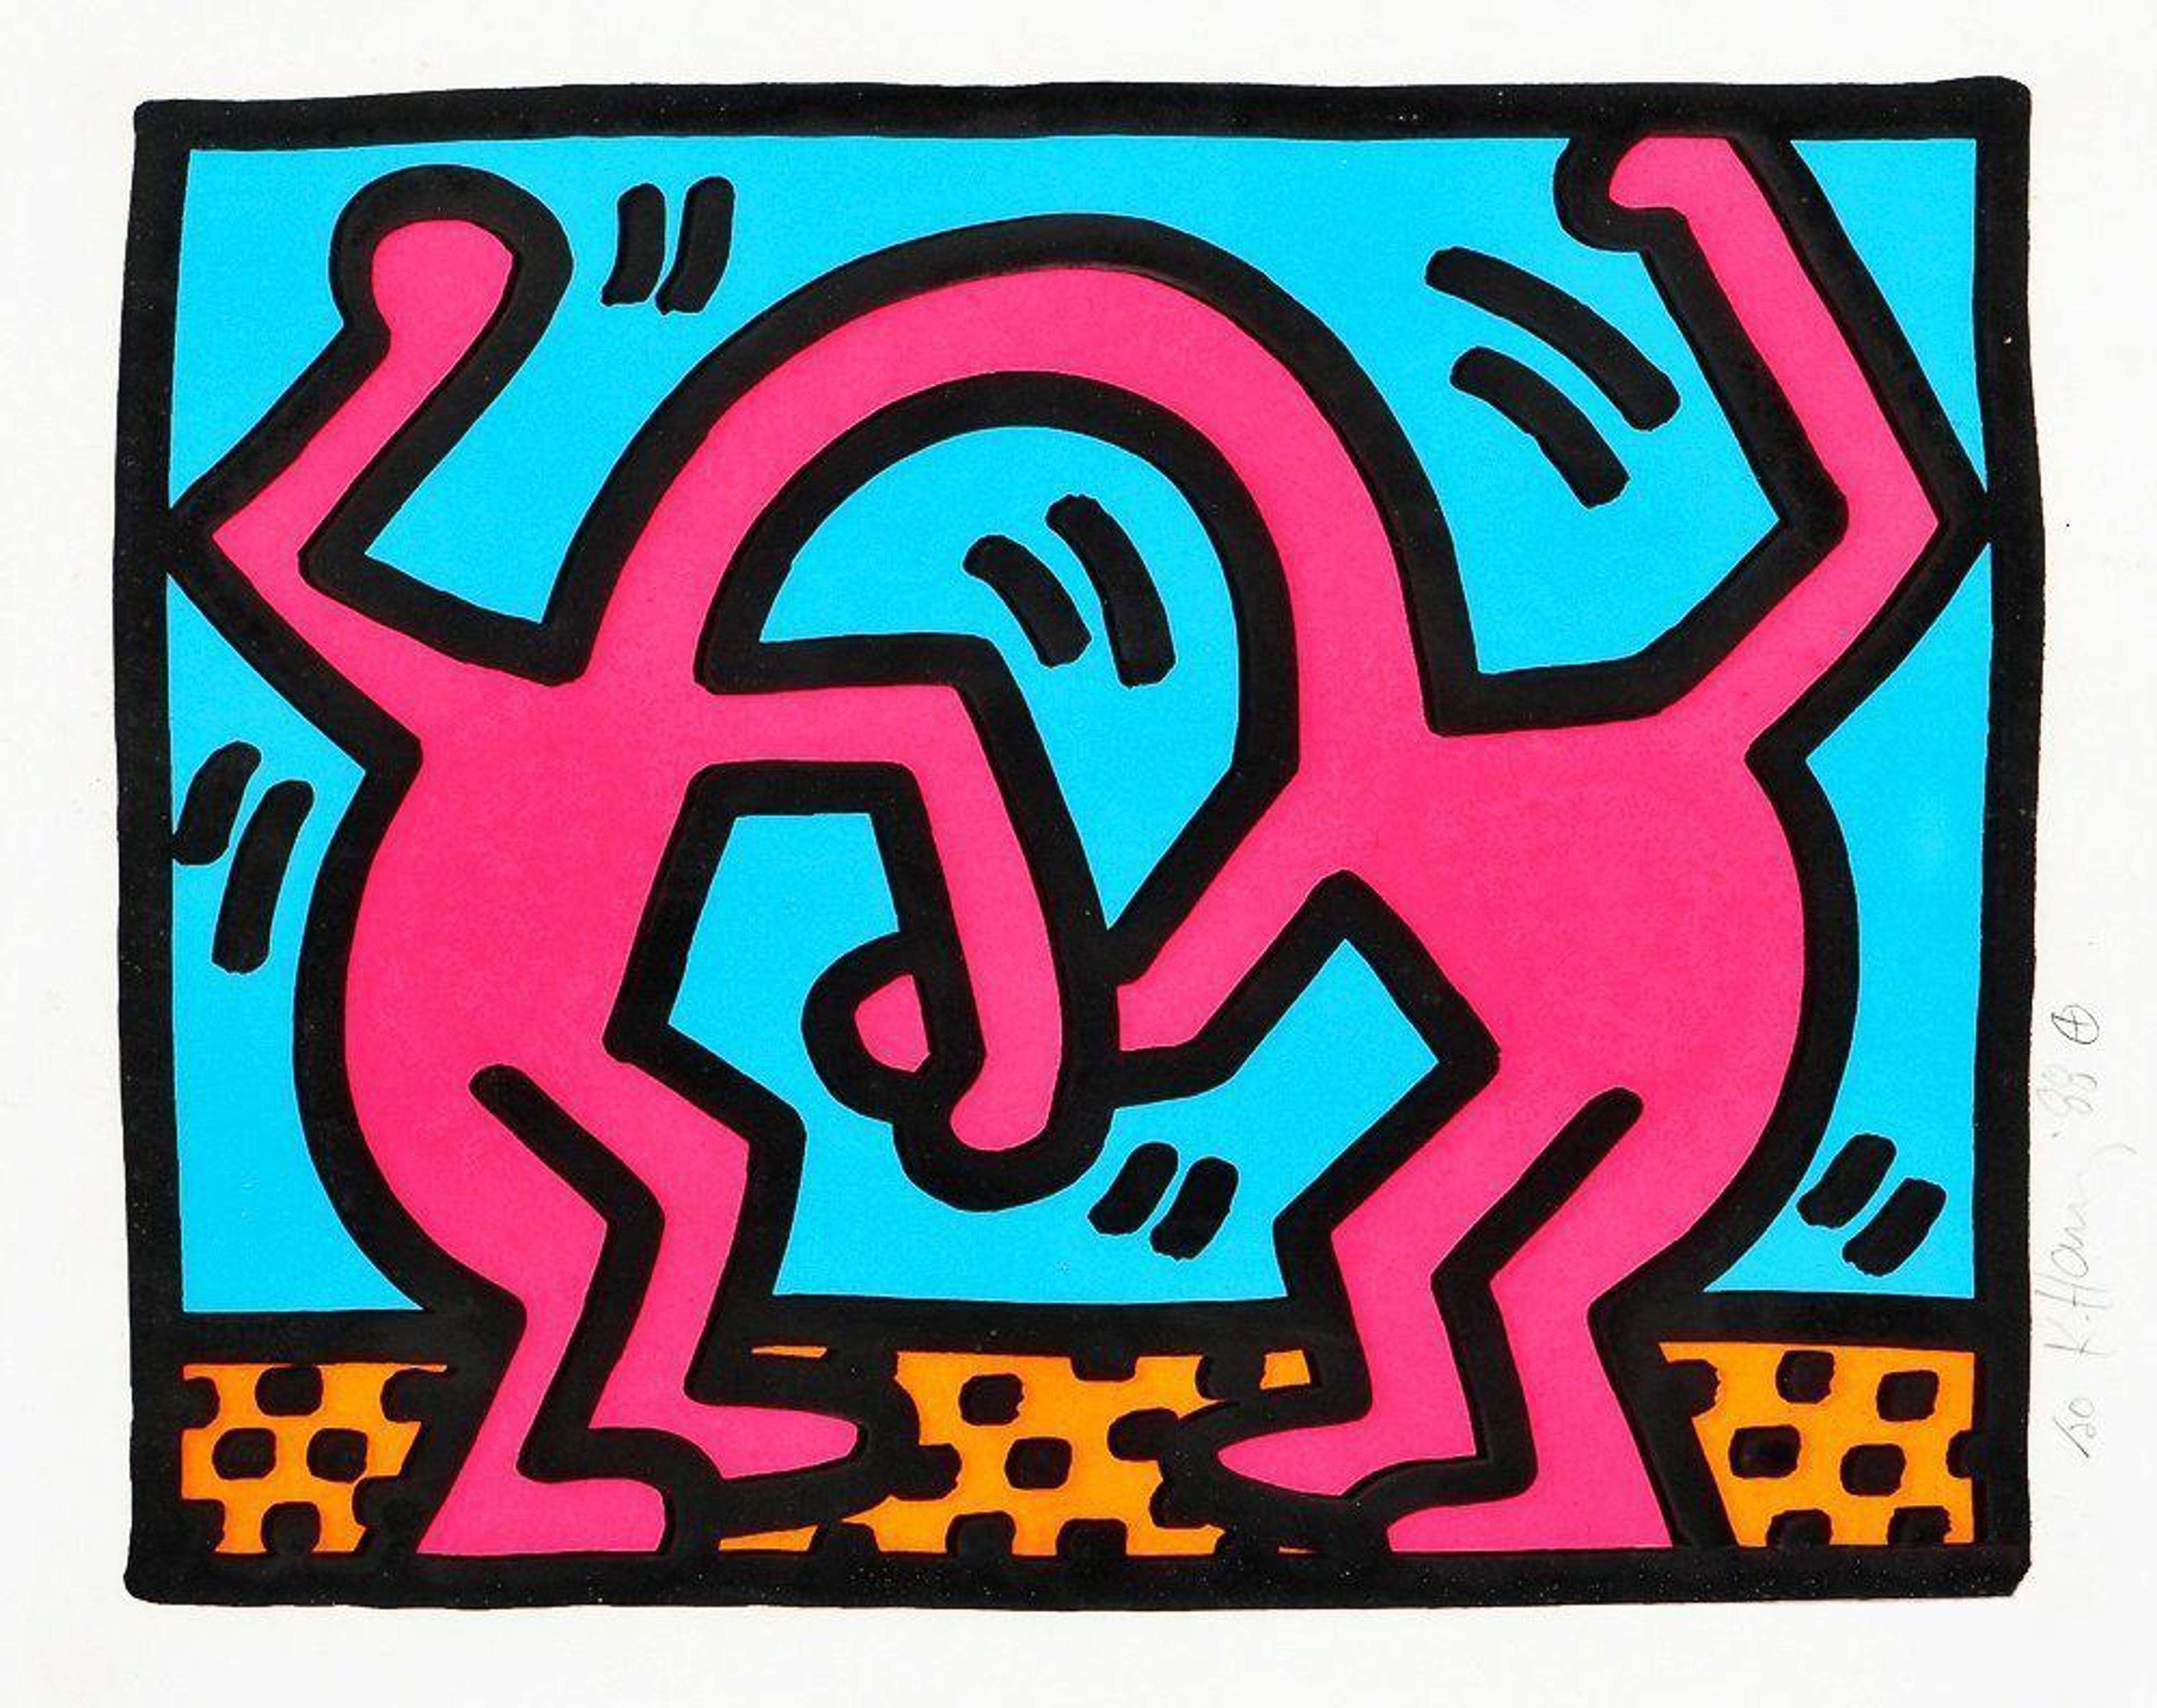 Keith Haring’s Pop Shop II, Plate IV. A Pop Art screenprint of two, pink animated characters connected at the neck, dancing with each other.Keith Haring’s Pop Shop II, Plate IV. A Pop Art screenprint of two, pink animated characters connected at the neck, dancing with each other.